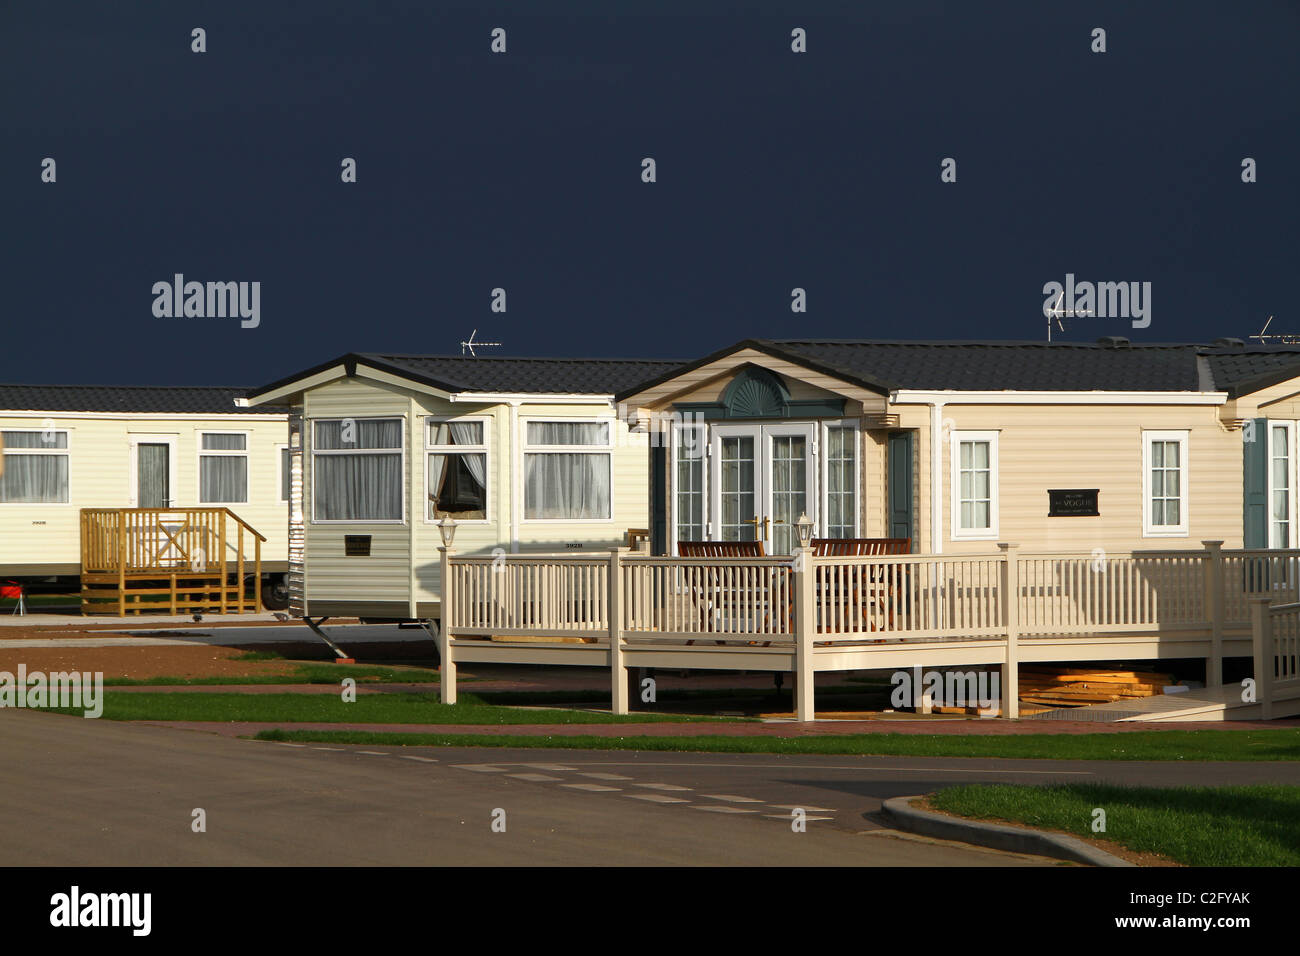 Large site holiday and residential caravans with dark thunder clouds. Stock Photo